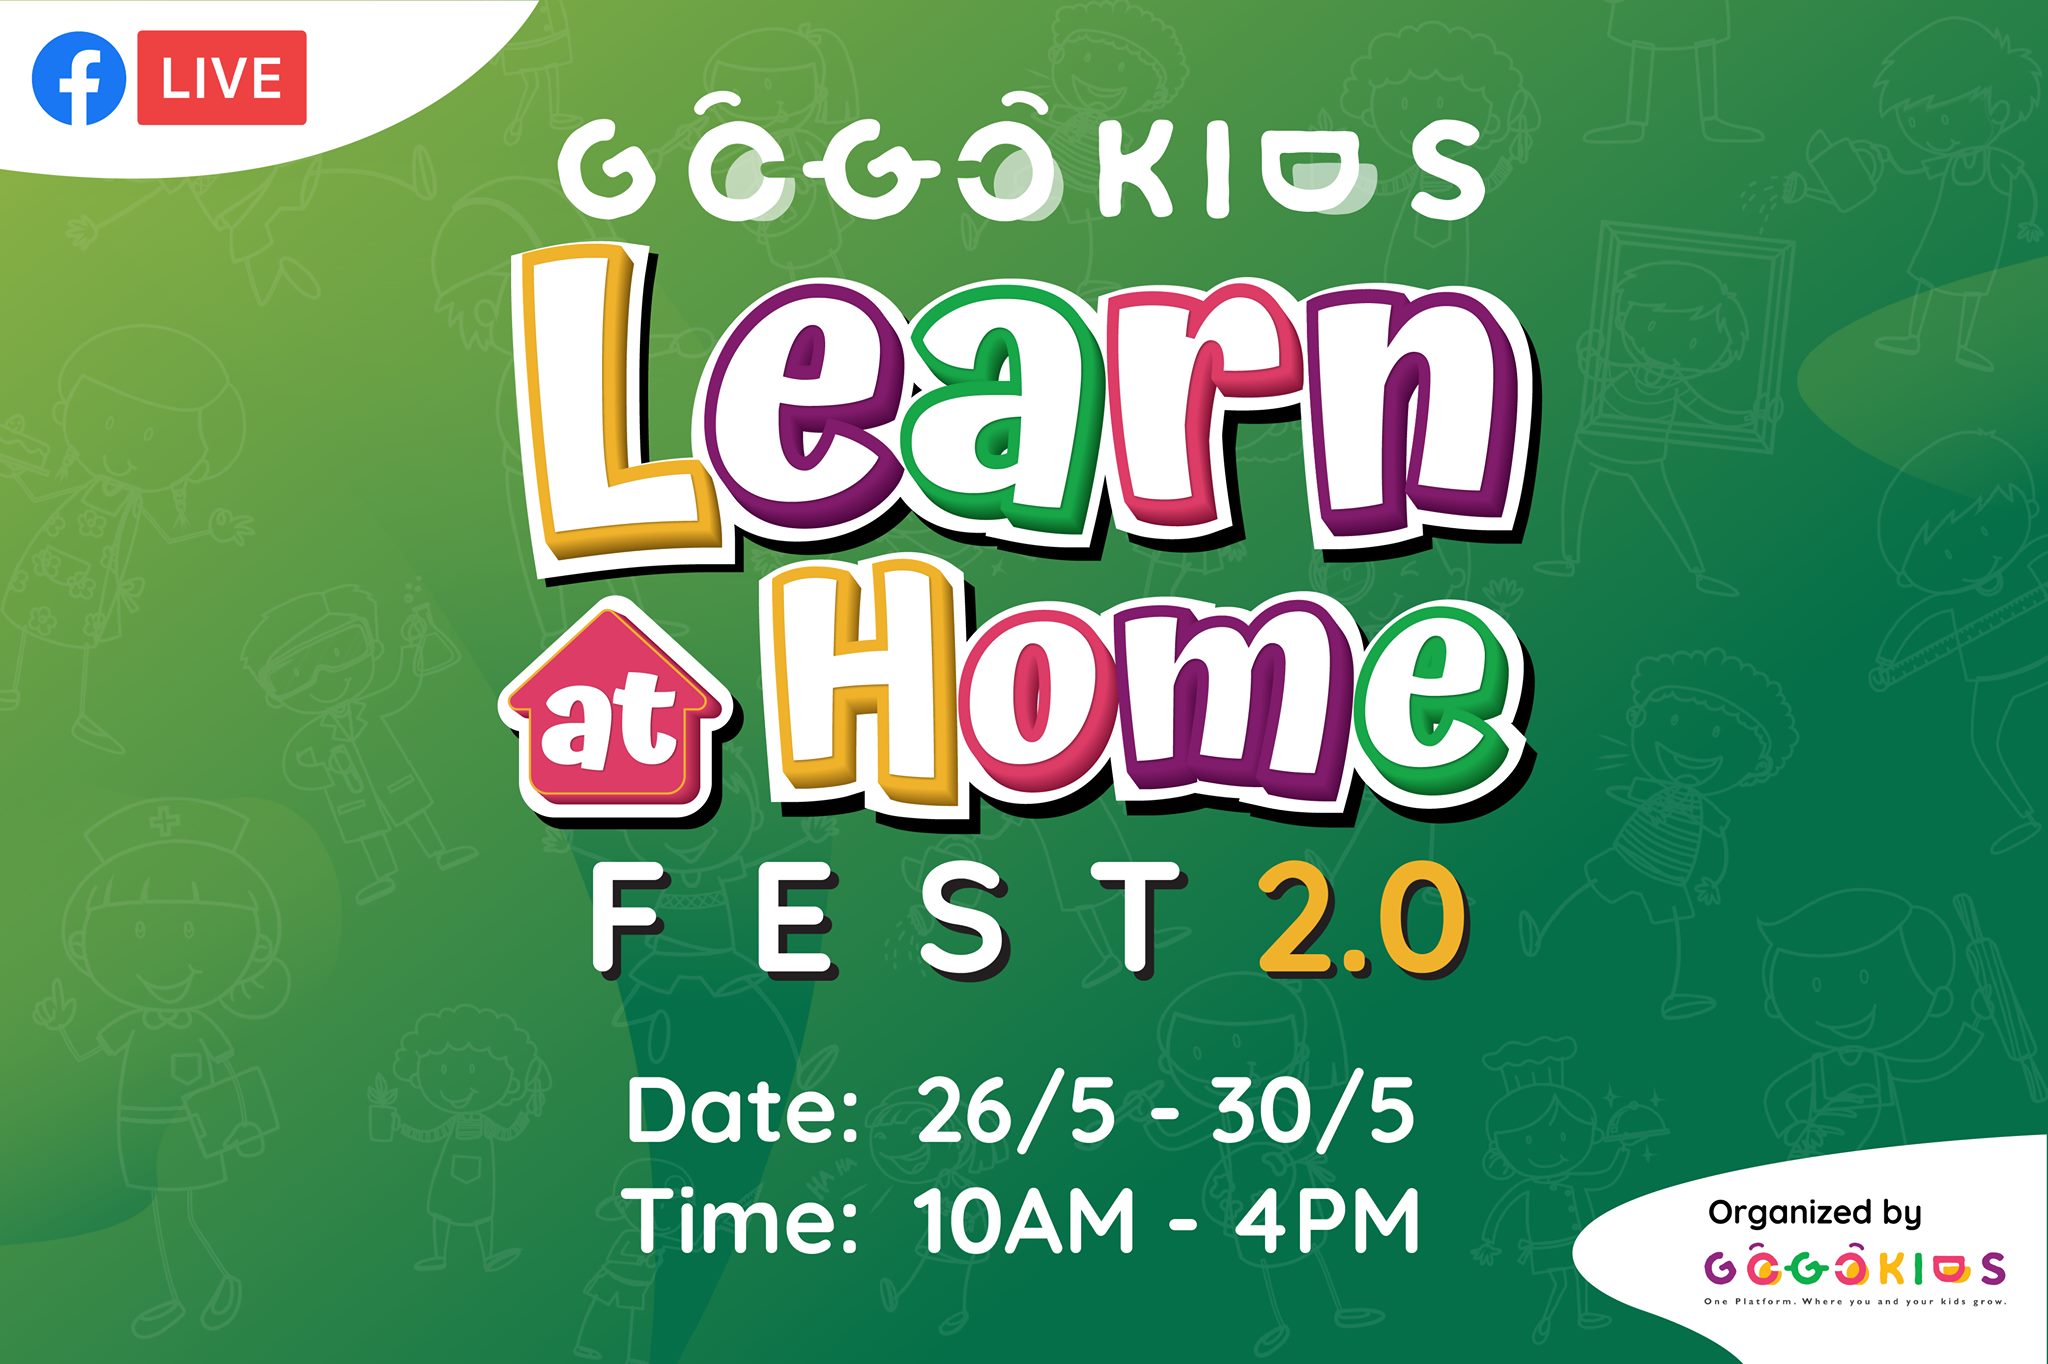 [May] GogoKids Learn At Home Fest 2.0